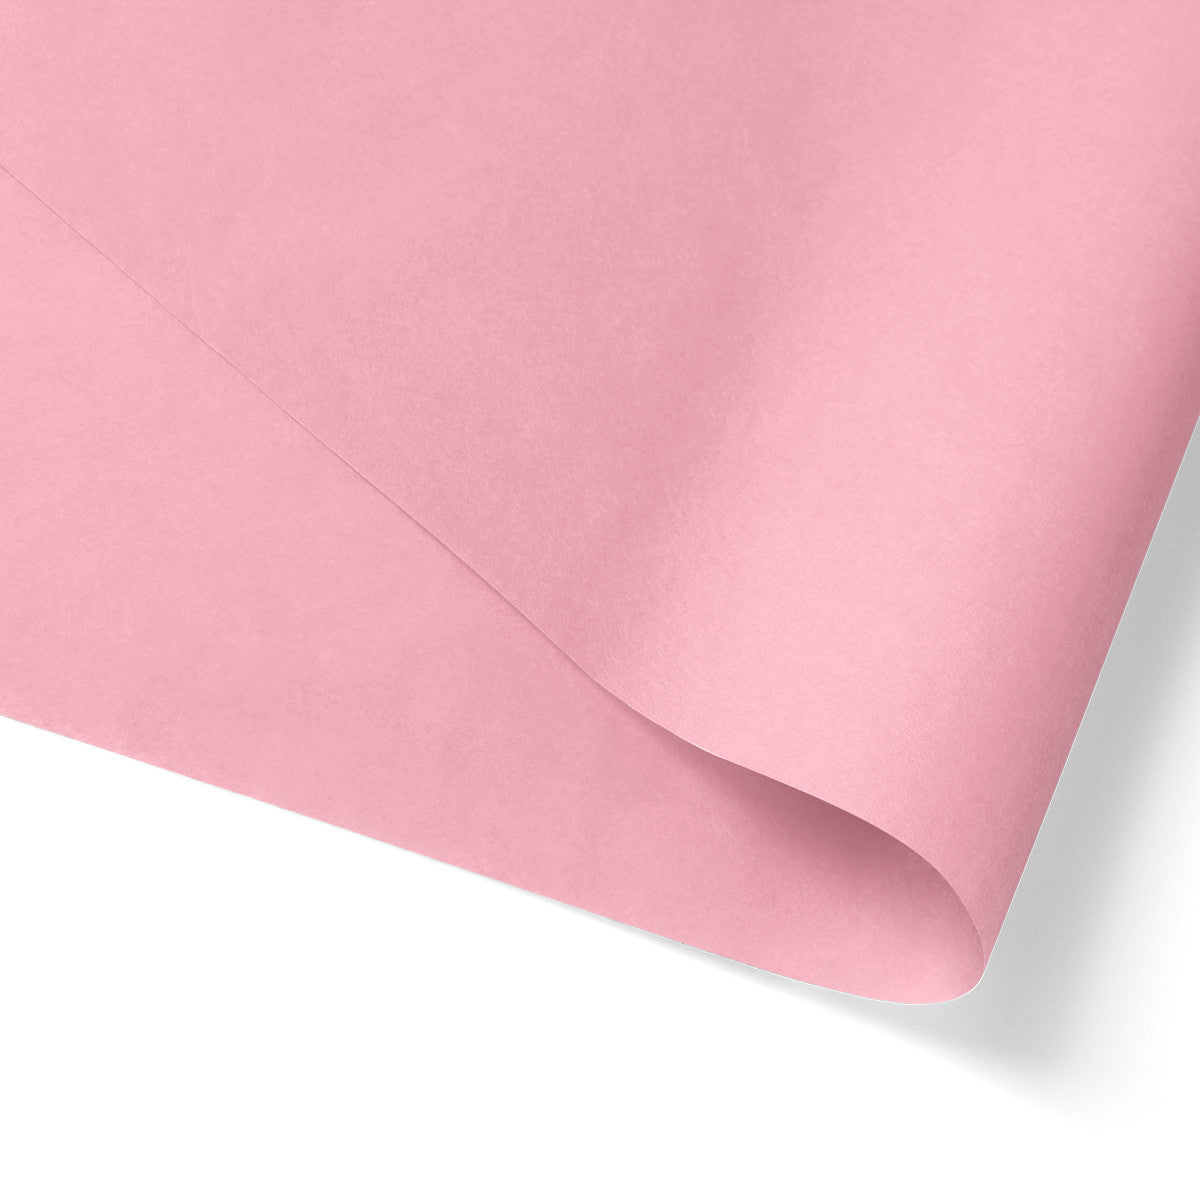 480pcs 20x30 inches Pink Solid Tissue Paper; $0.07/pc